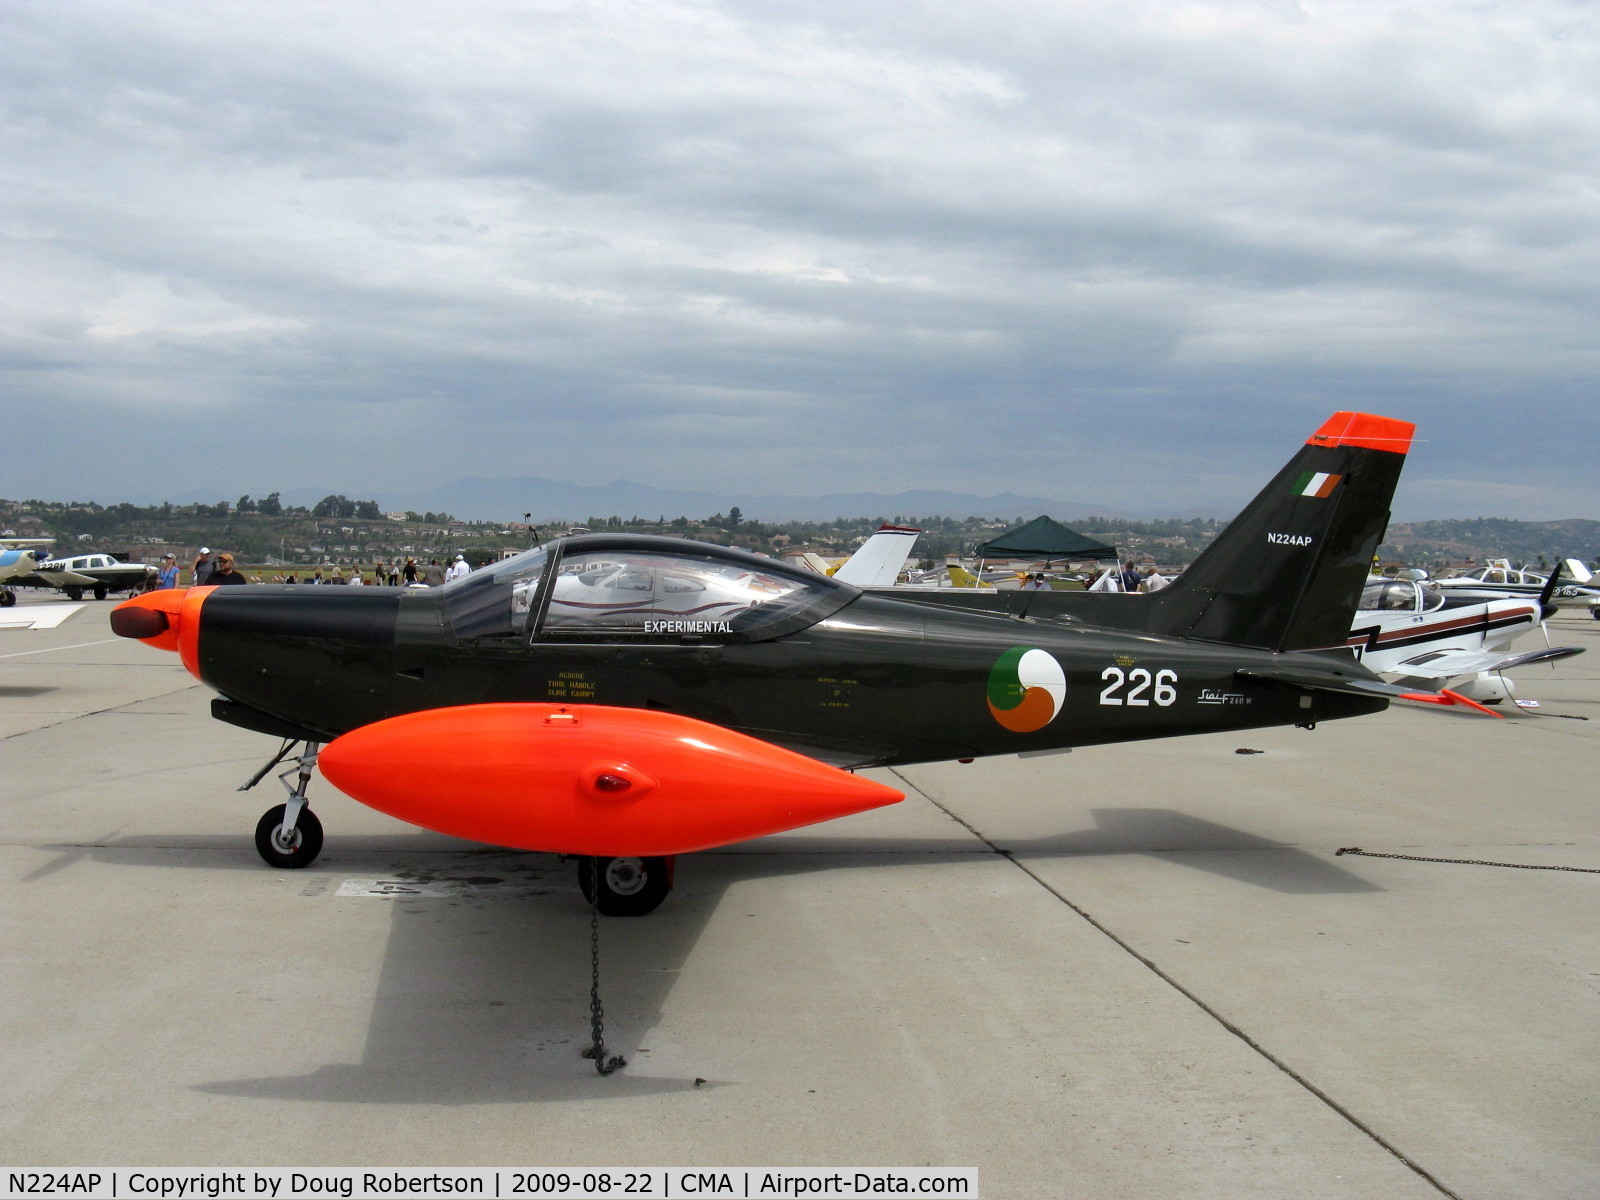 N224AP, 1977 SIAI-Marchetti SF-260W Warrior C/N 293/24-05, 1977 SIAI-Marchetti SF.260W, Lycoming IO-540-D4A5 260 Hp, Tip tanks, side-by-side normally flown from right seat, Experimental class